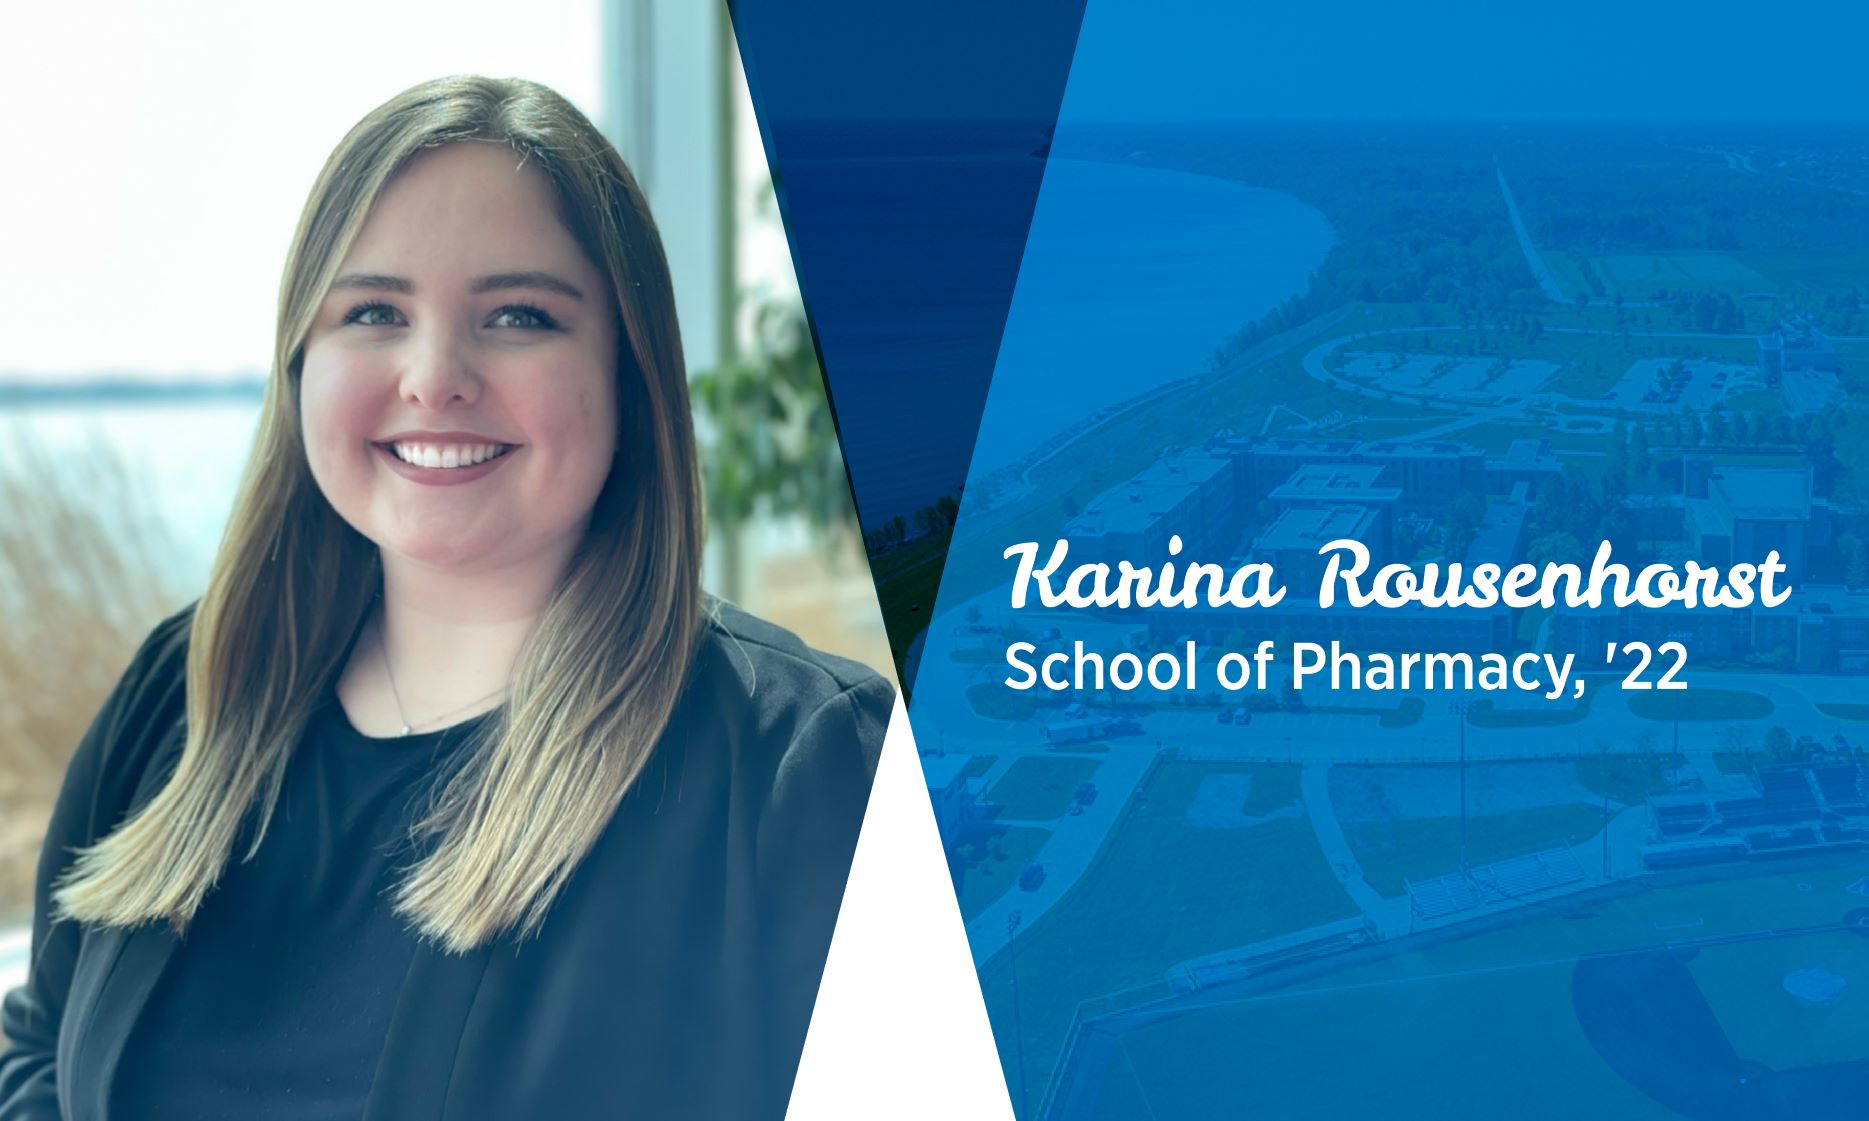 Recent grad reflects on what it is like to be a Pharmacy student